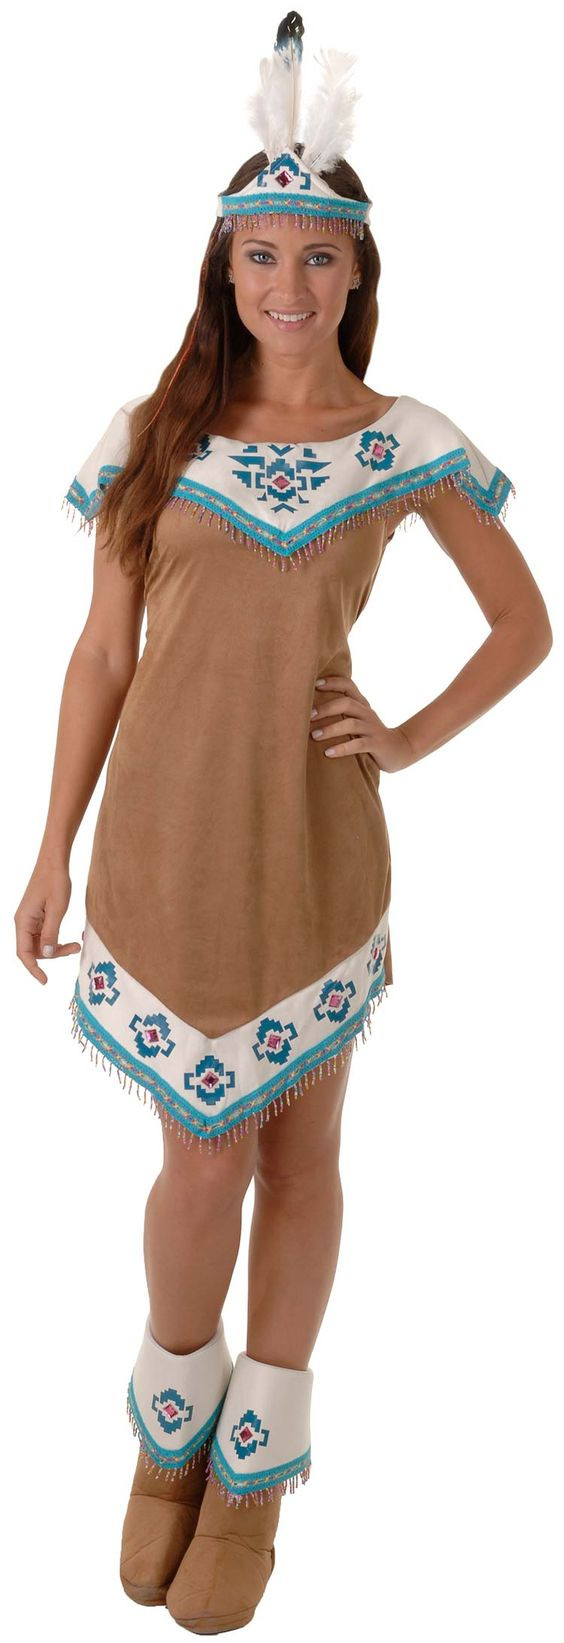 DIY Native American Costume
 Homemade For women and Indian costumes on Pinterest